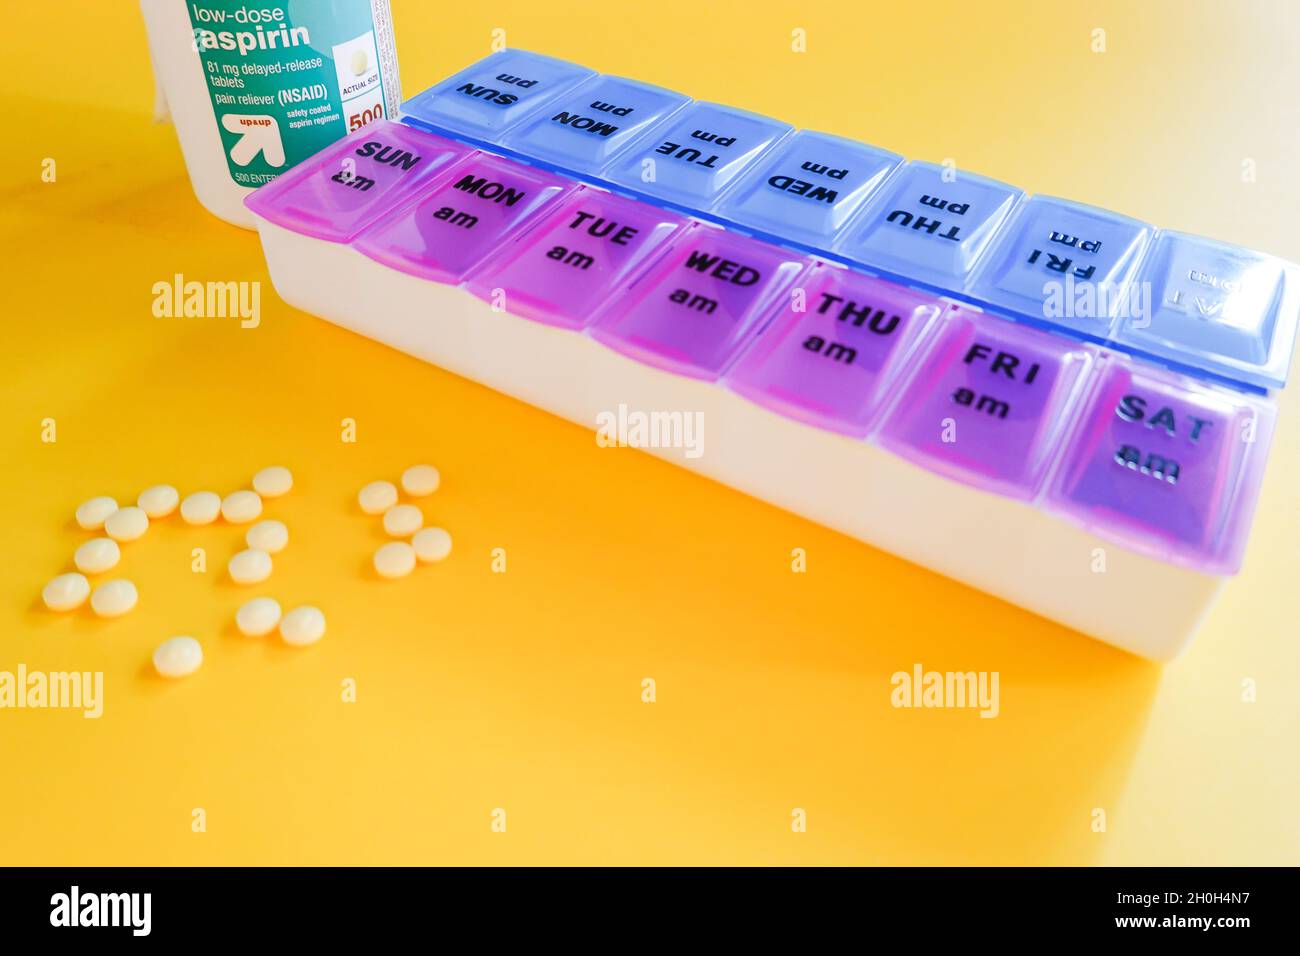 Bayer low dose safety coated 81 mg aspirin tablet container against a yellow background with a daily pill planner box Stock Photo